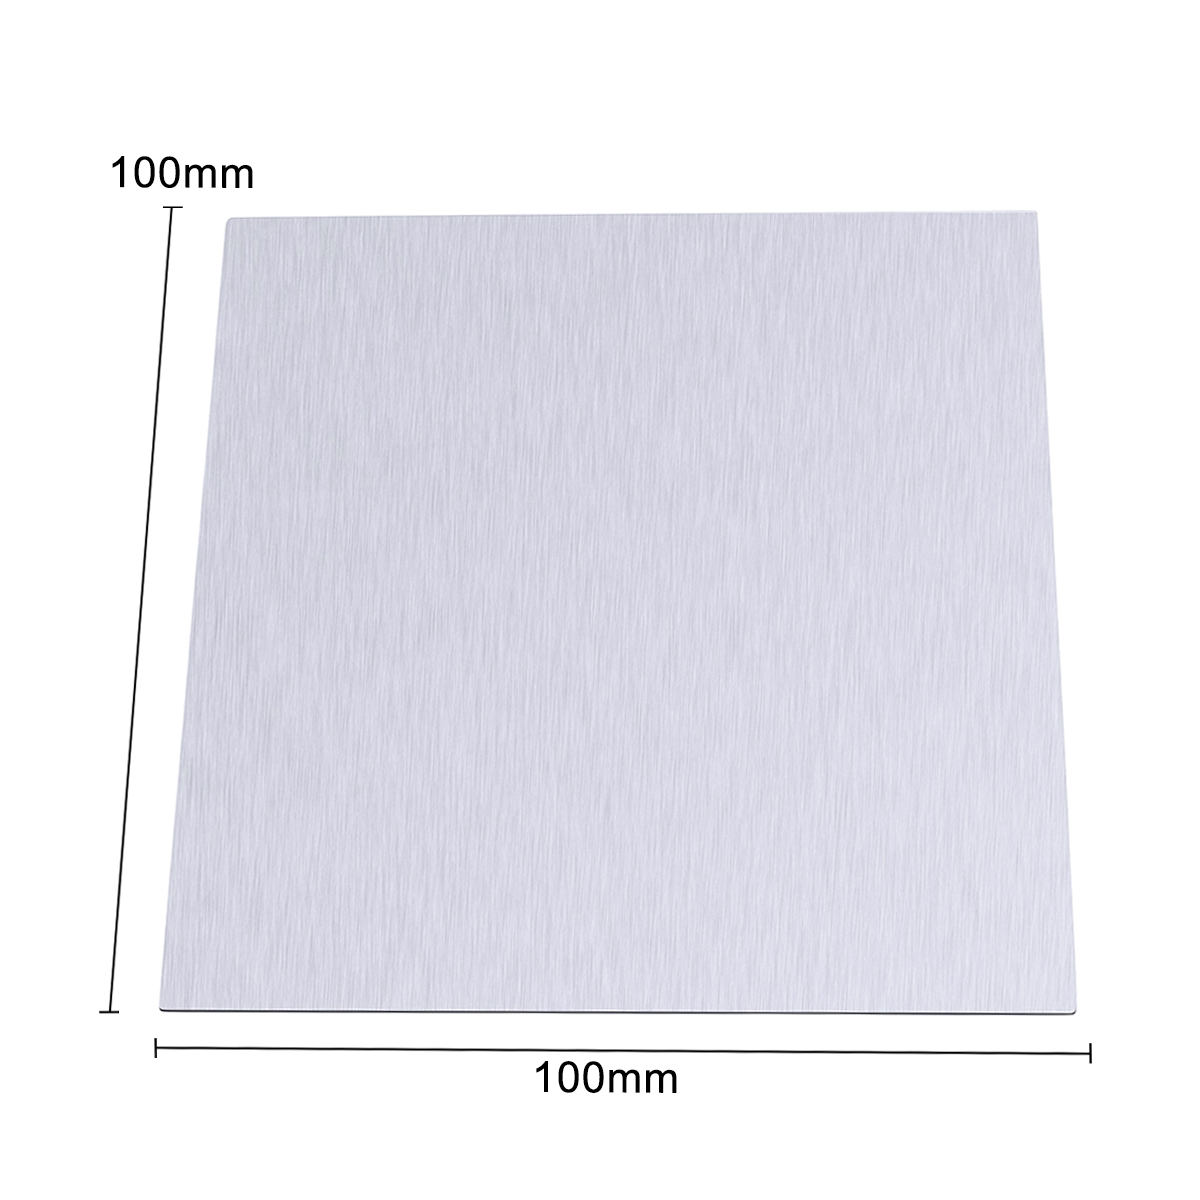 1pc New Pure Zinc Plate High Purity Pure Zinc Plate Zinc Sheet Plate 0.5mm Thickness Metal Foil 100x100x0.5mm For Science